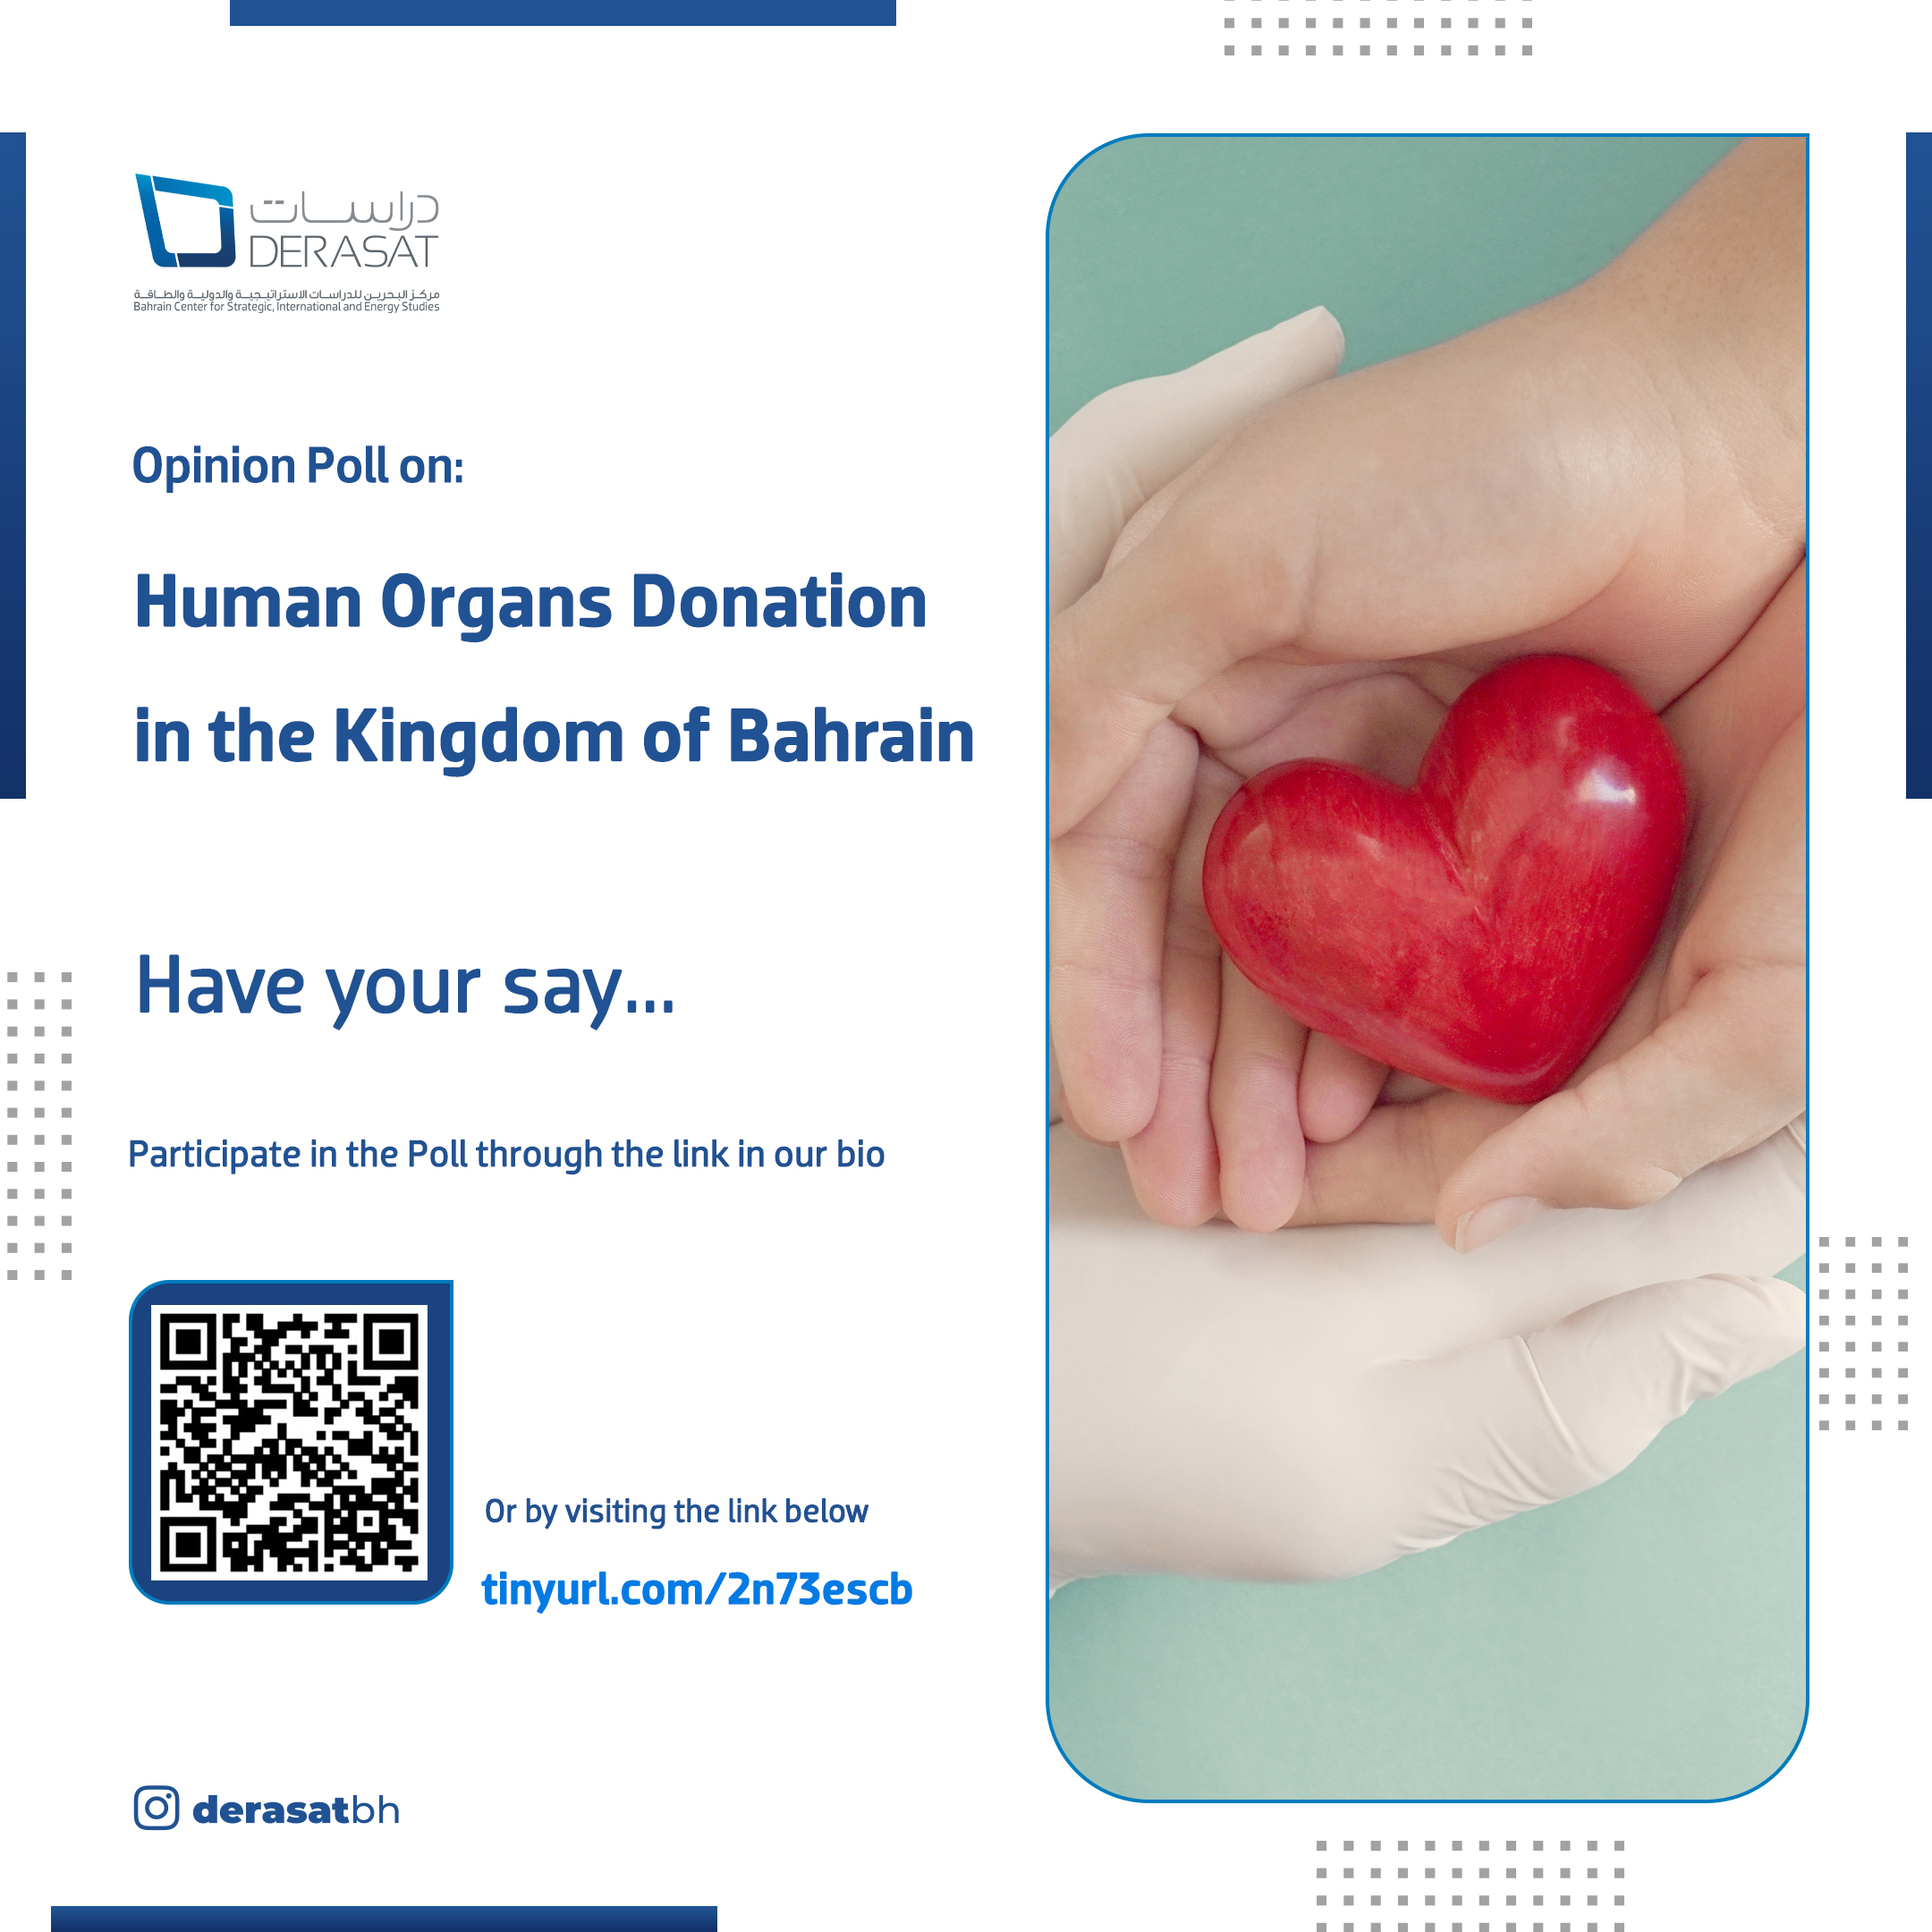 Opinion Poll: Human Organs Donation in the Kingdom of Bahrain